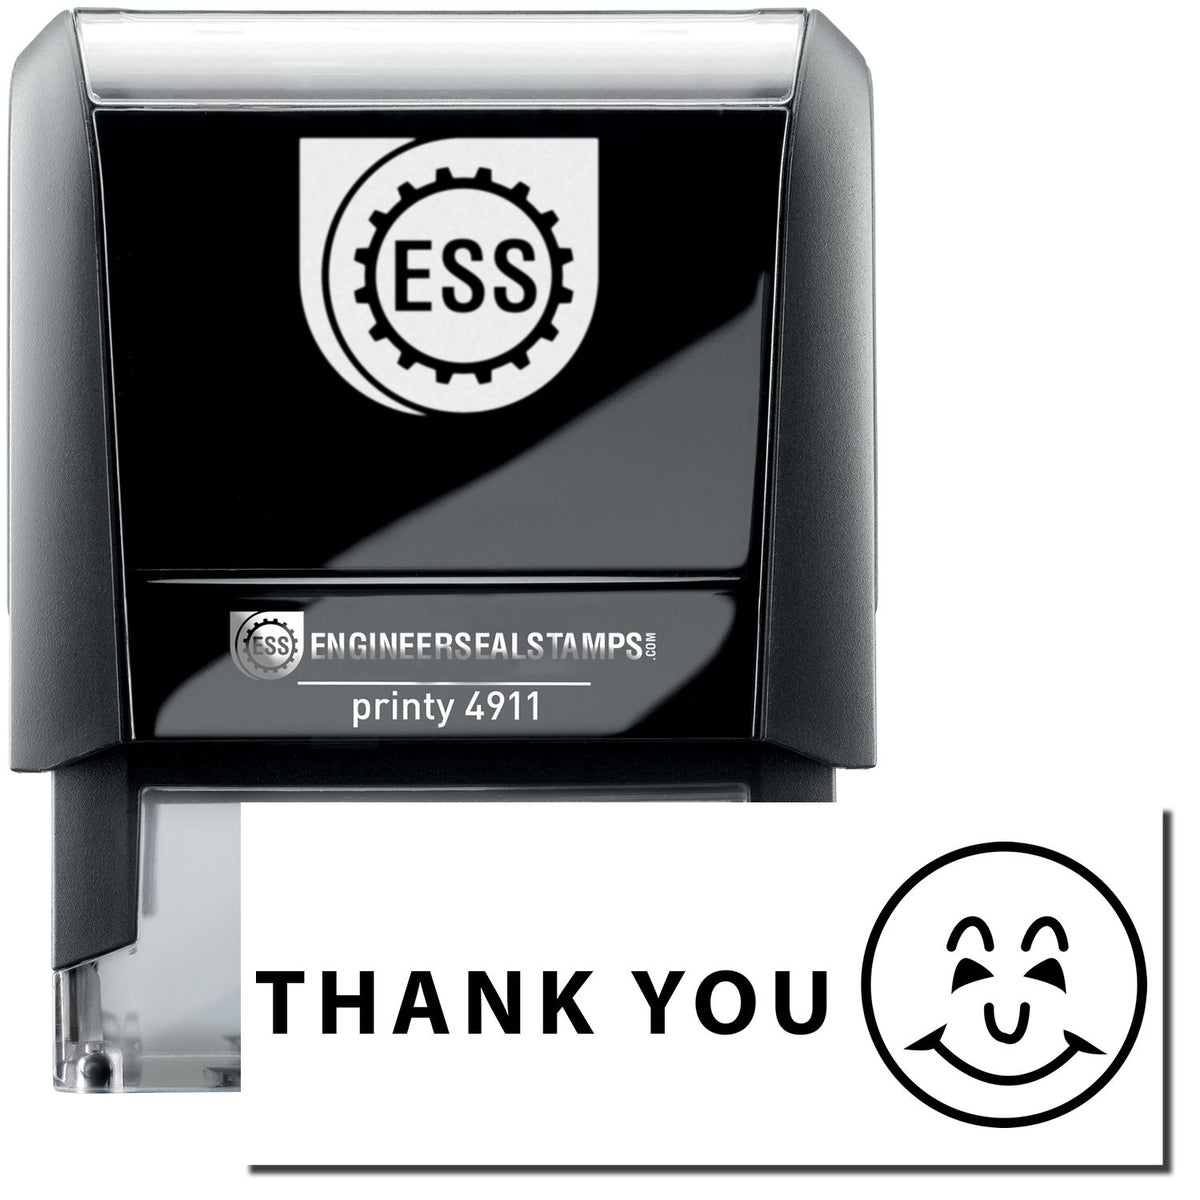 A self-inking stamp with a stamped image showing how the text &quot;THANK YOU&quot; with an image of a smiley on the right is displayed after stamping.